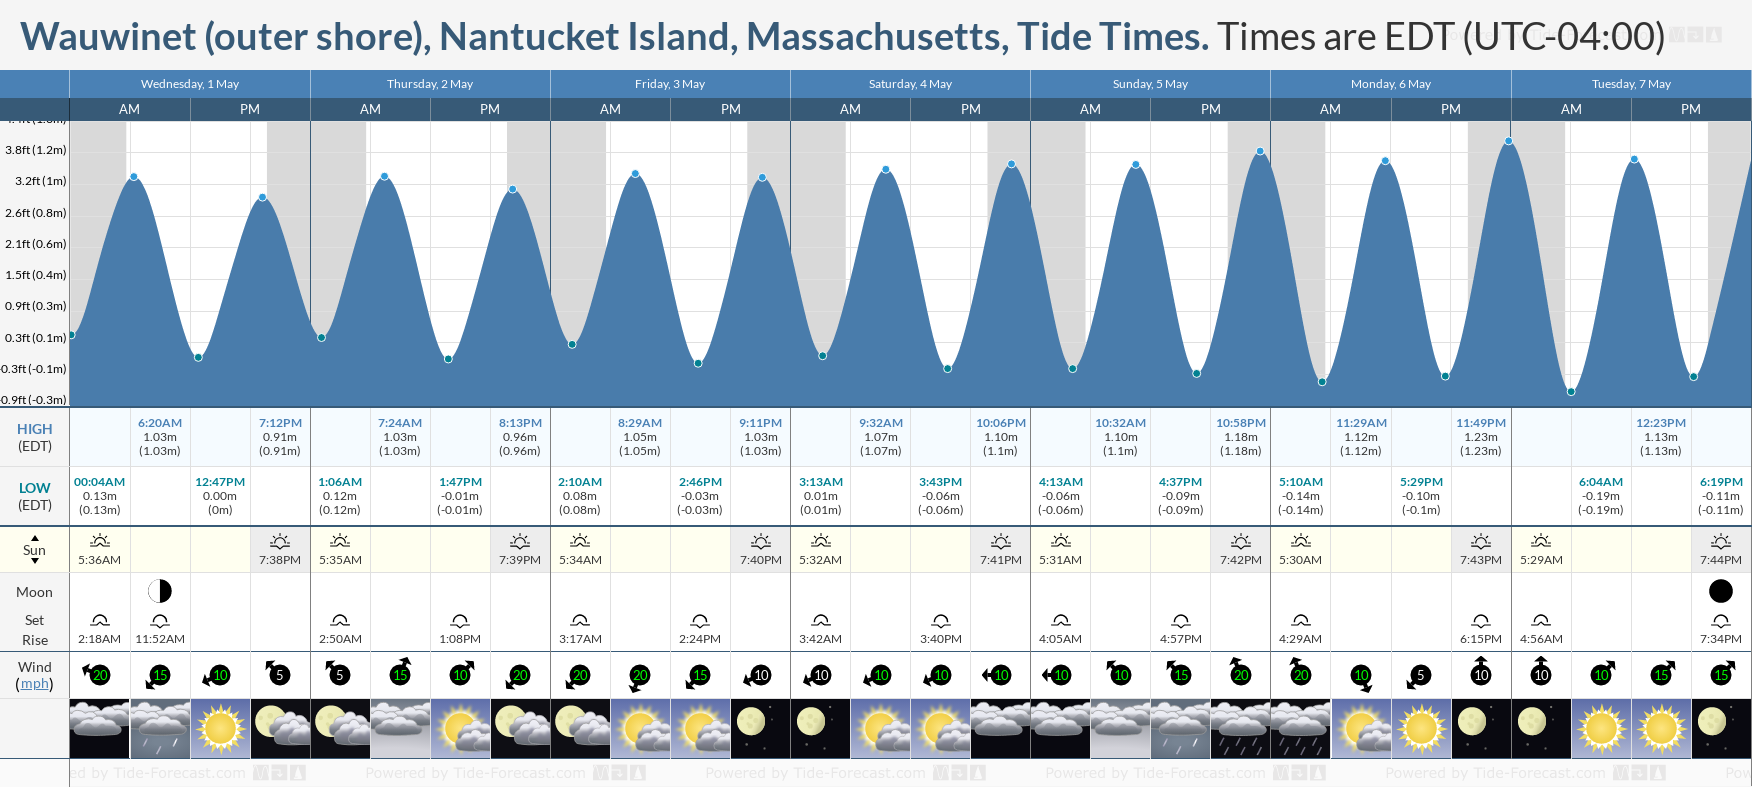 Wauwinet (outer shore), Nantucket Island, Massachusetts Tide Chart including high and low tide tide times for the next 7 days